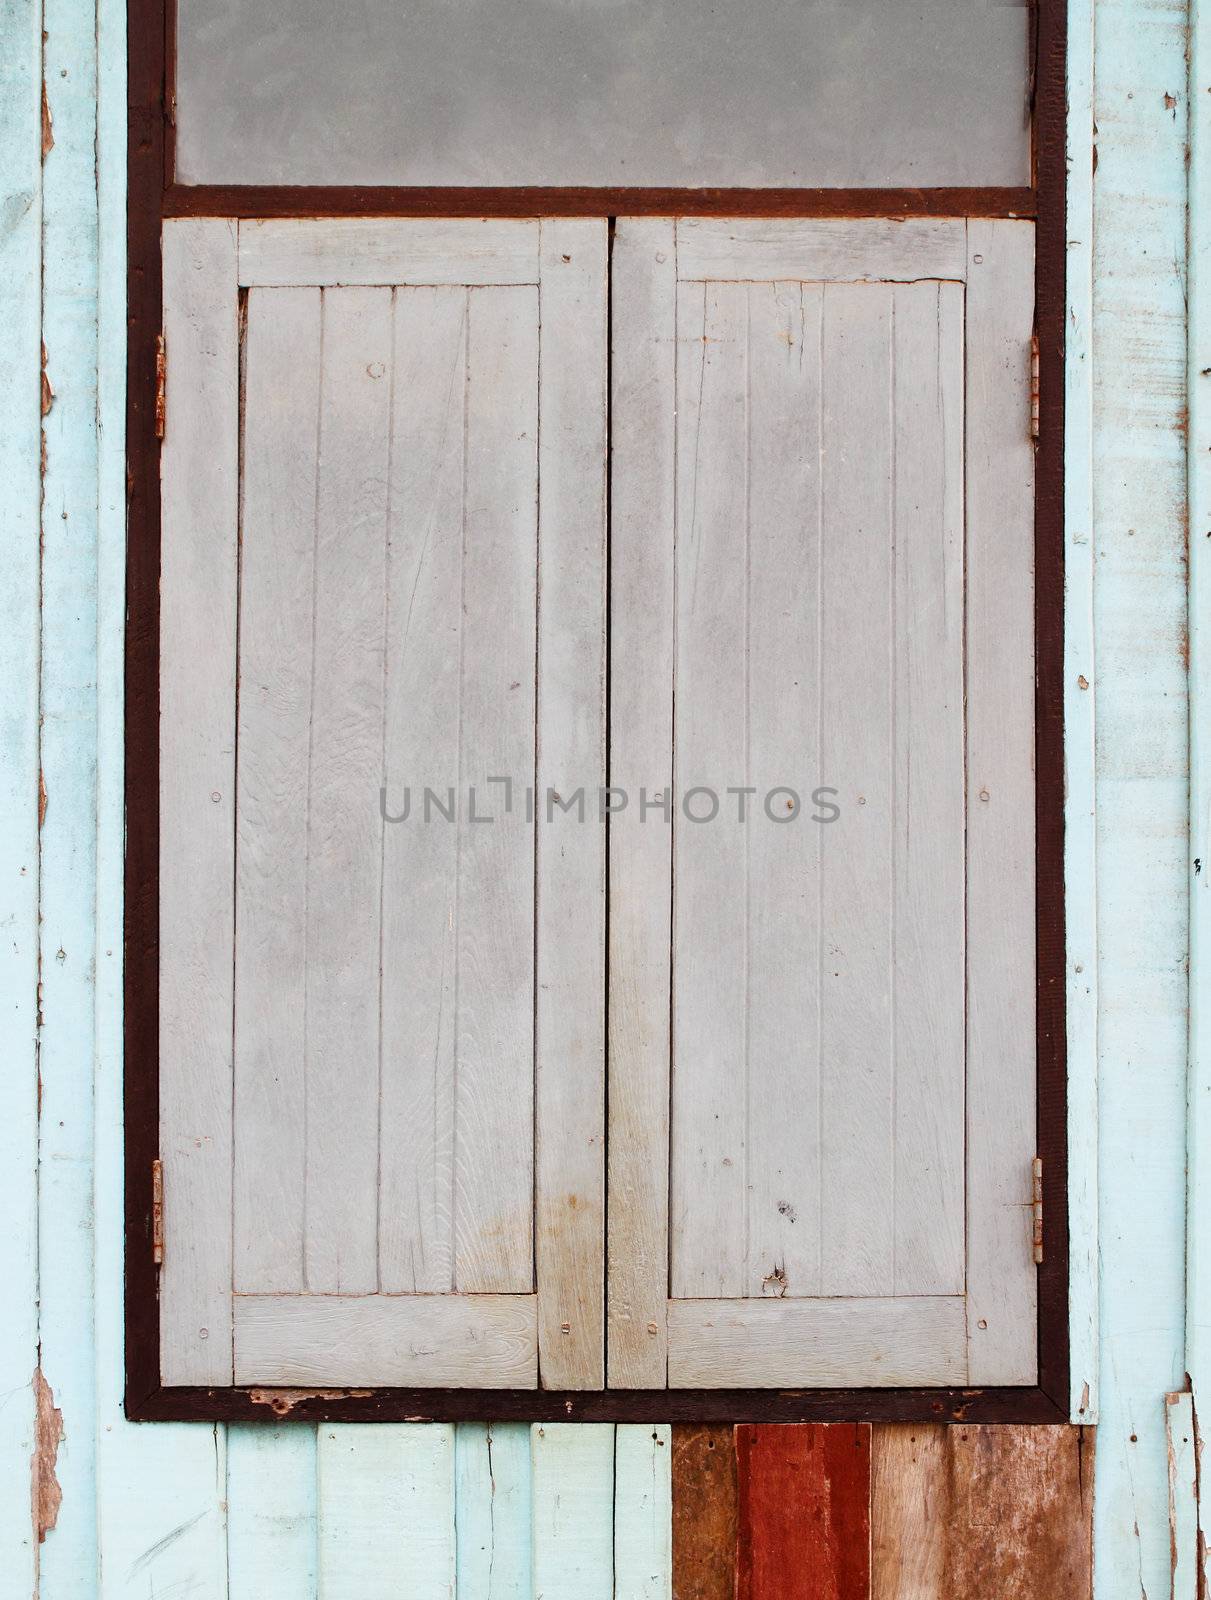 old wooden window on wooden wall